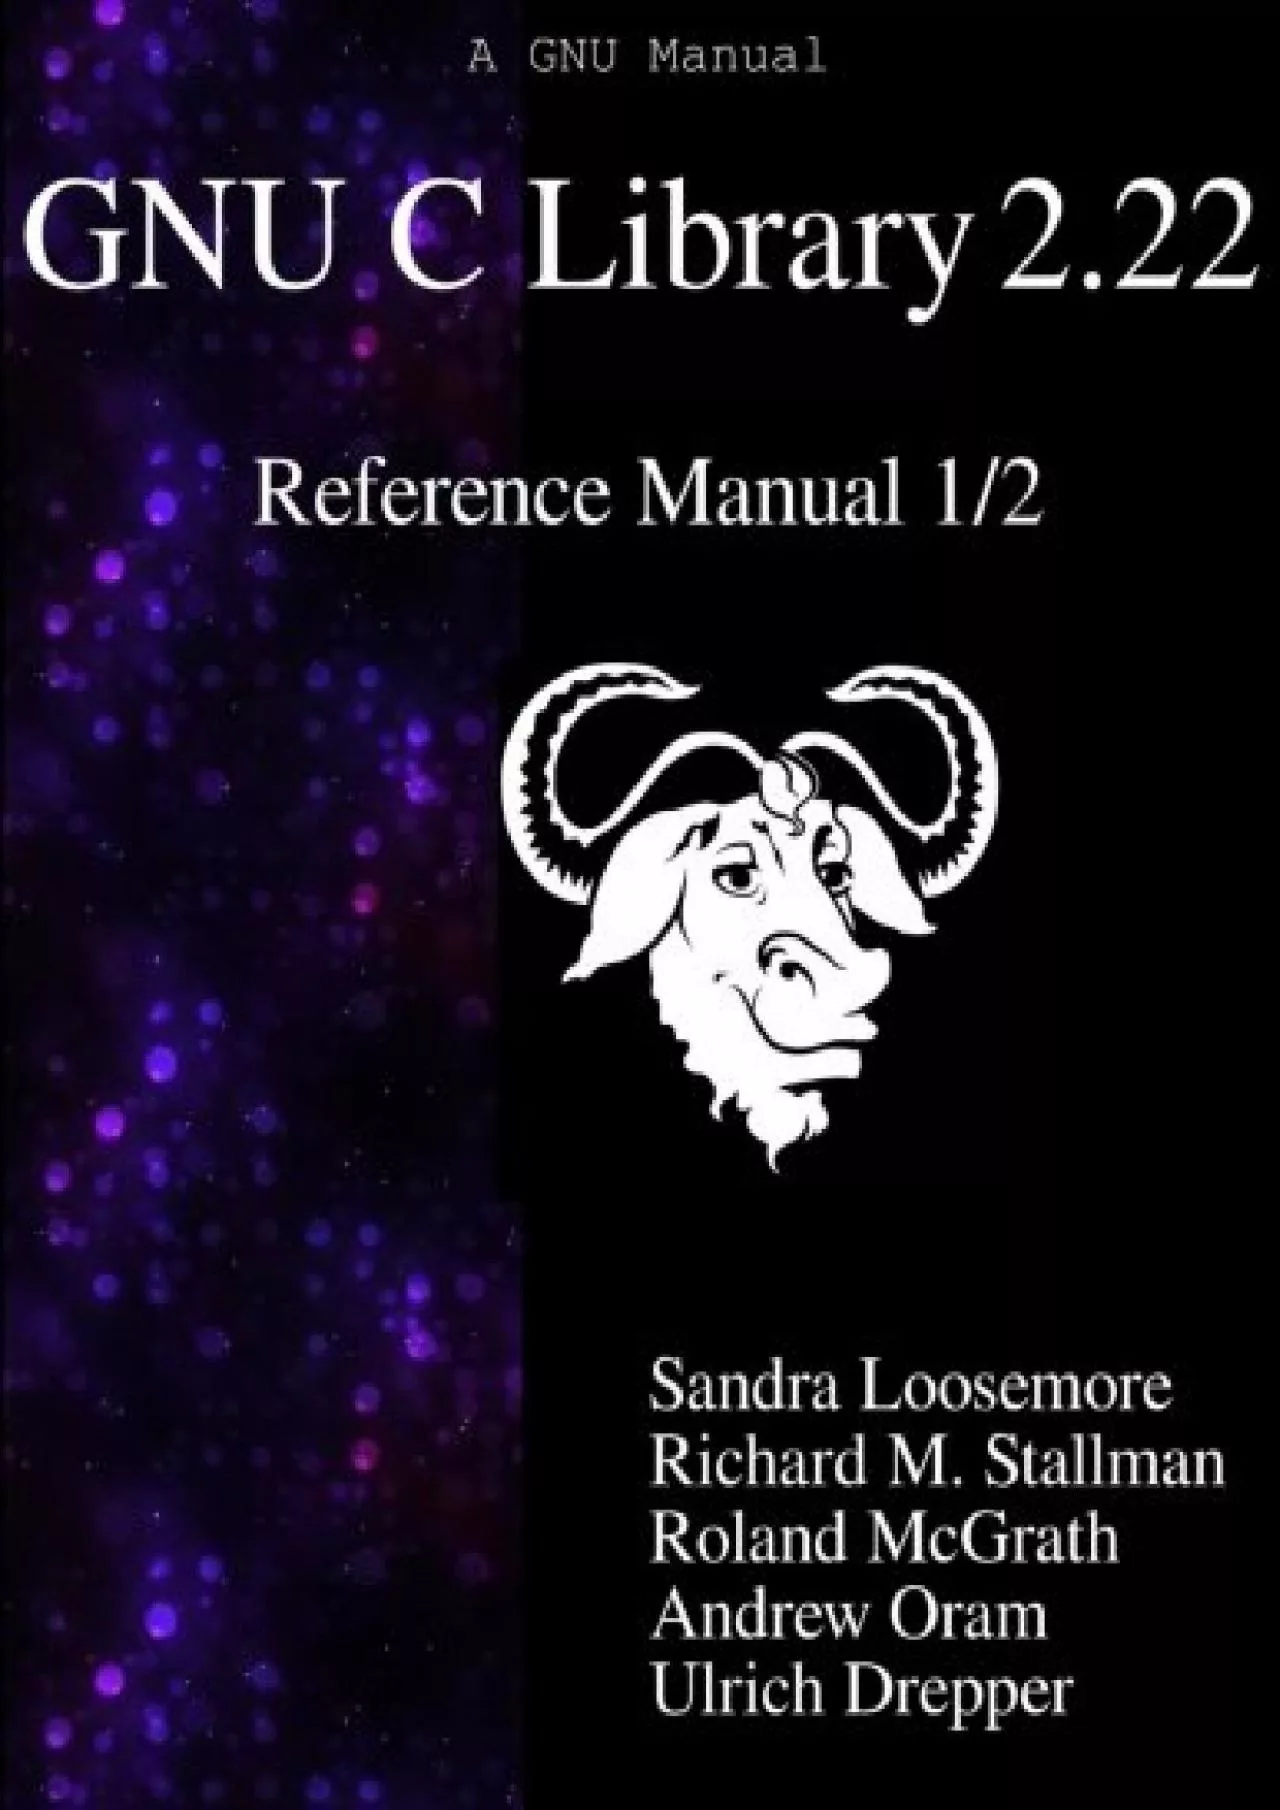 [eBOOK]-GNU C Library 2.22 Reference Manual 1/2